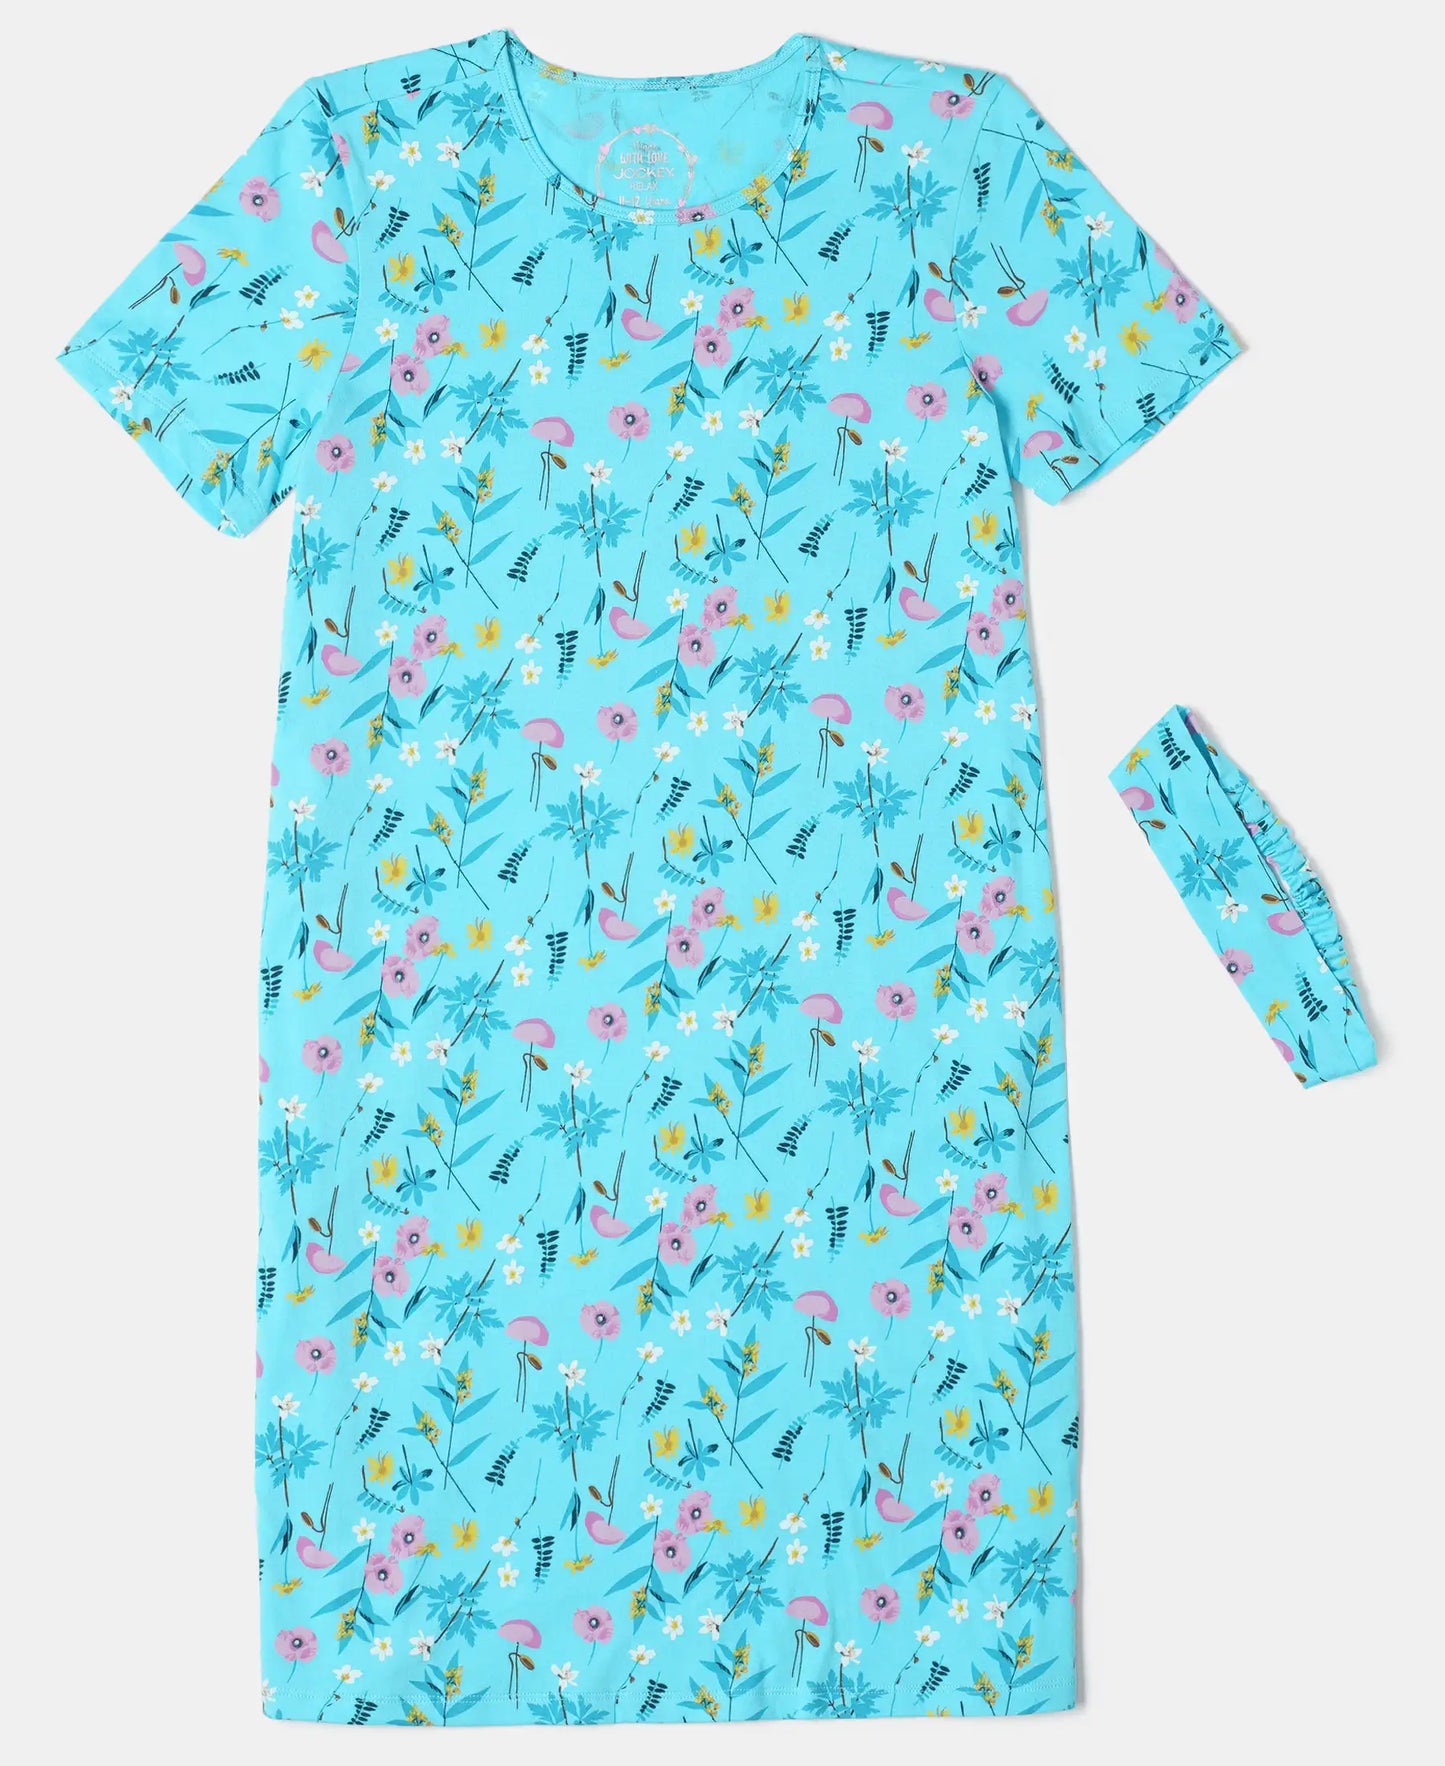 Girl's Super Combed Cotton Printed Dress with Matching Headband - Blue Curacao Printed